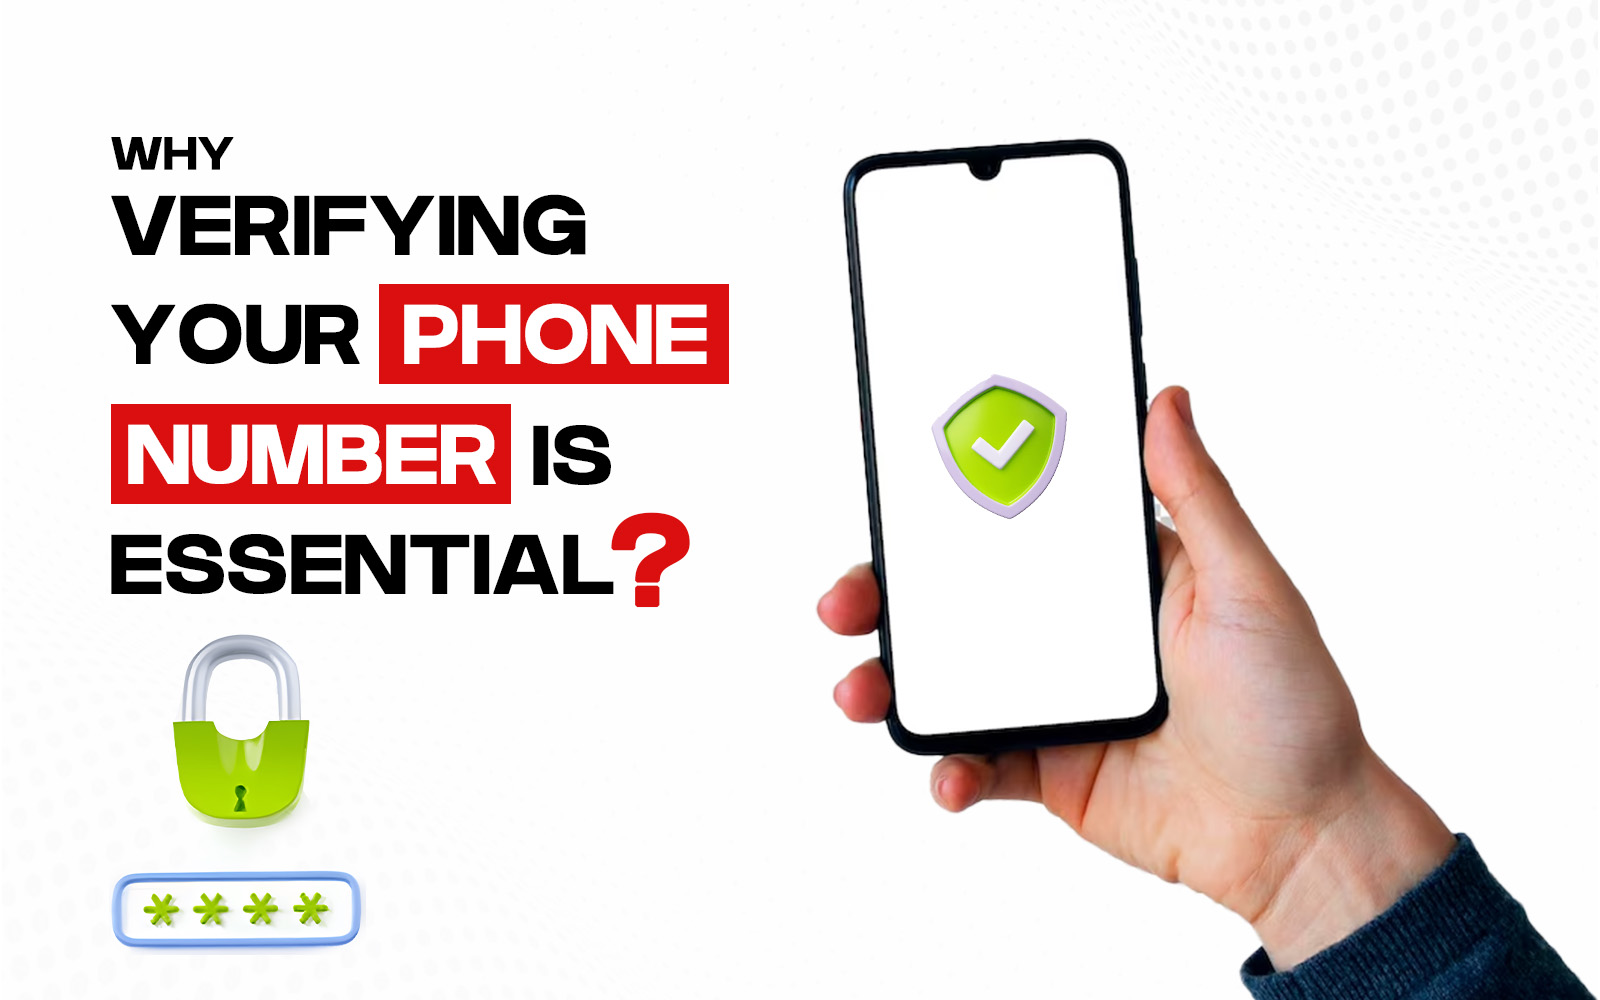 Why Verifying Your Phone Number is Essential